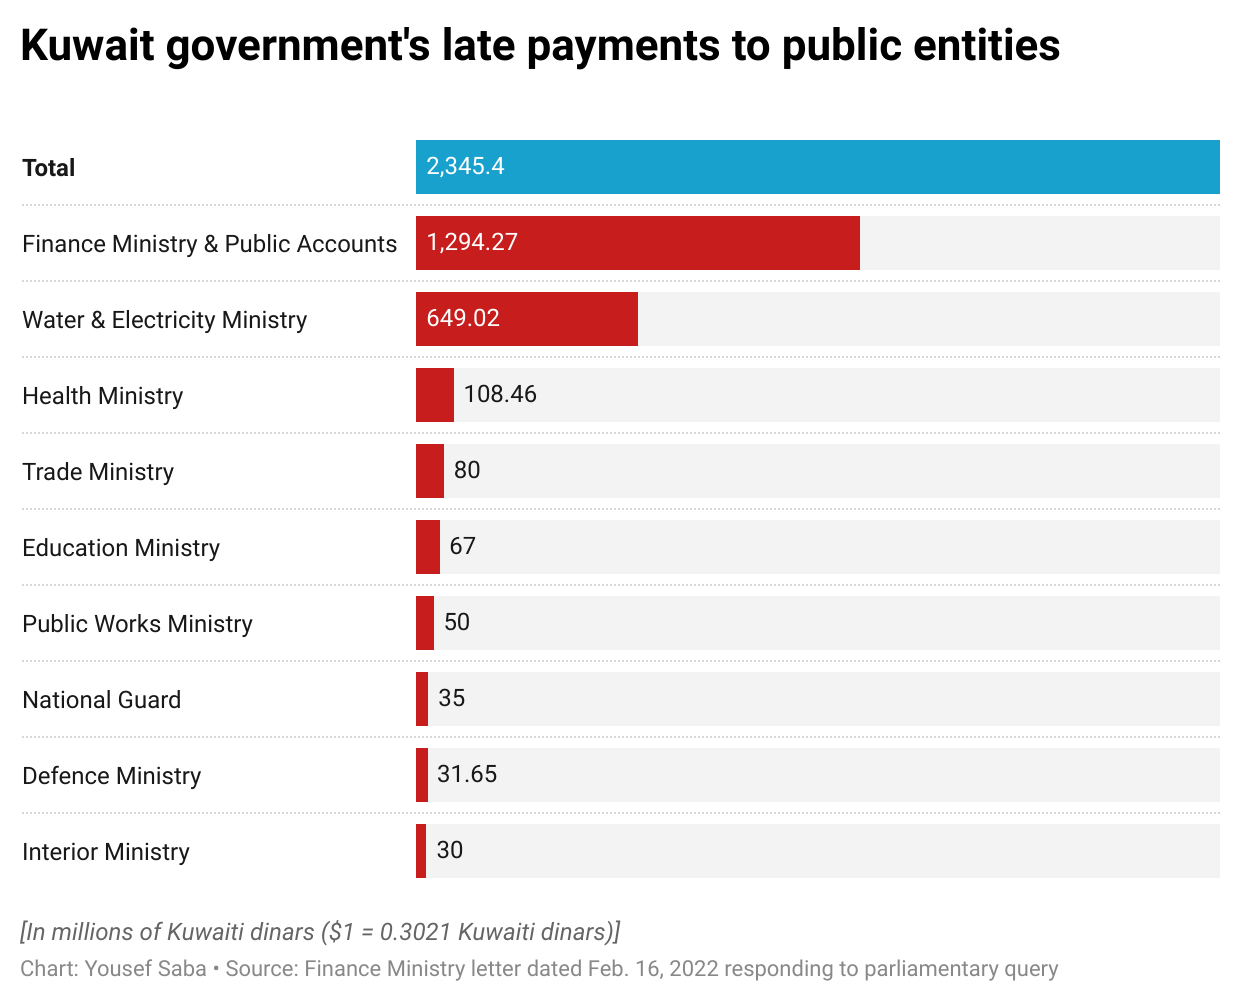 Kuwait government's late payments to public entities